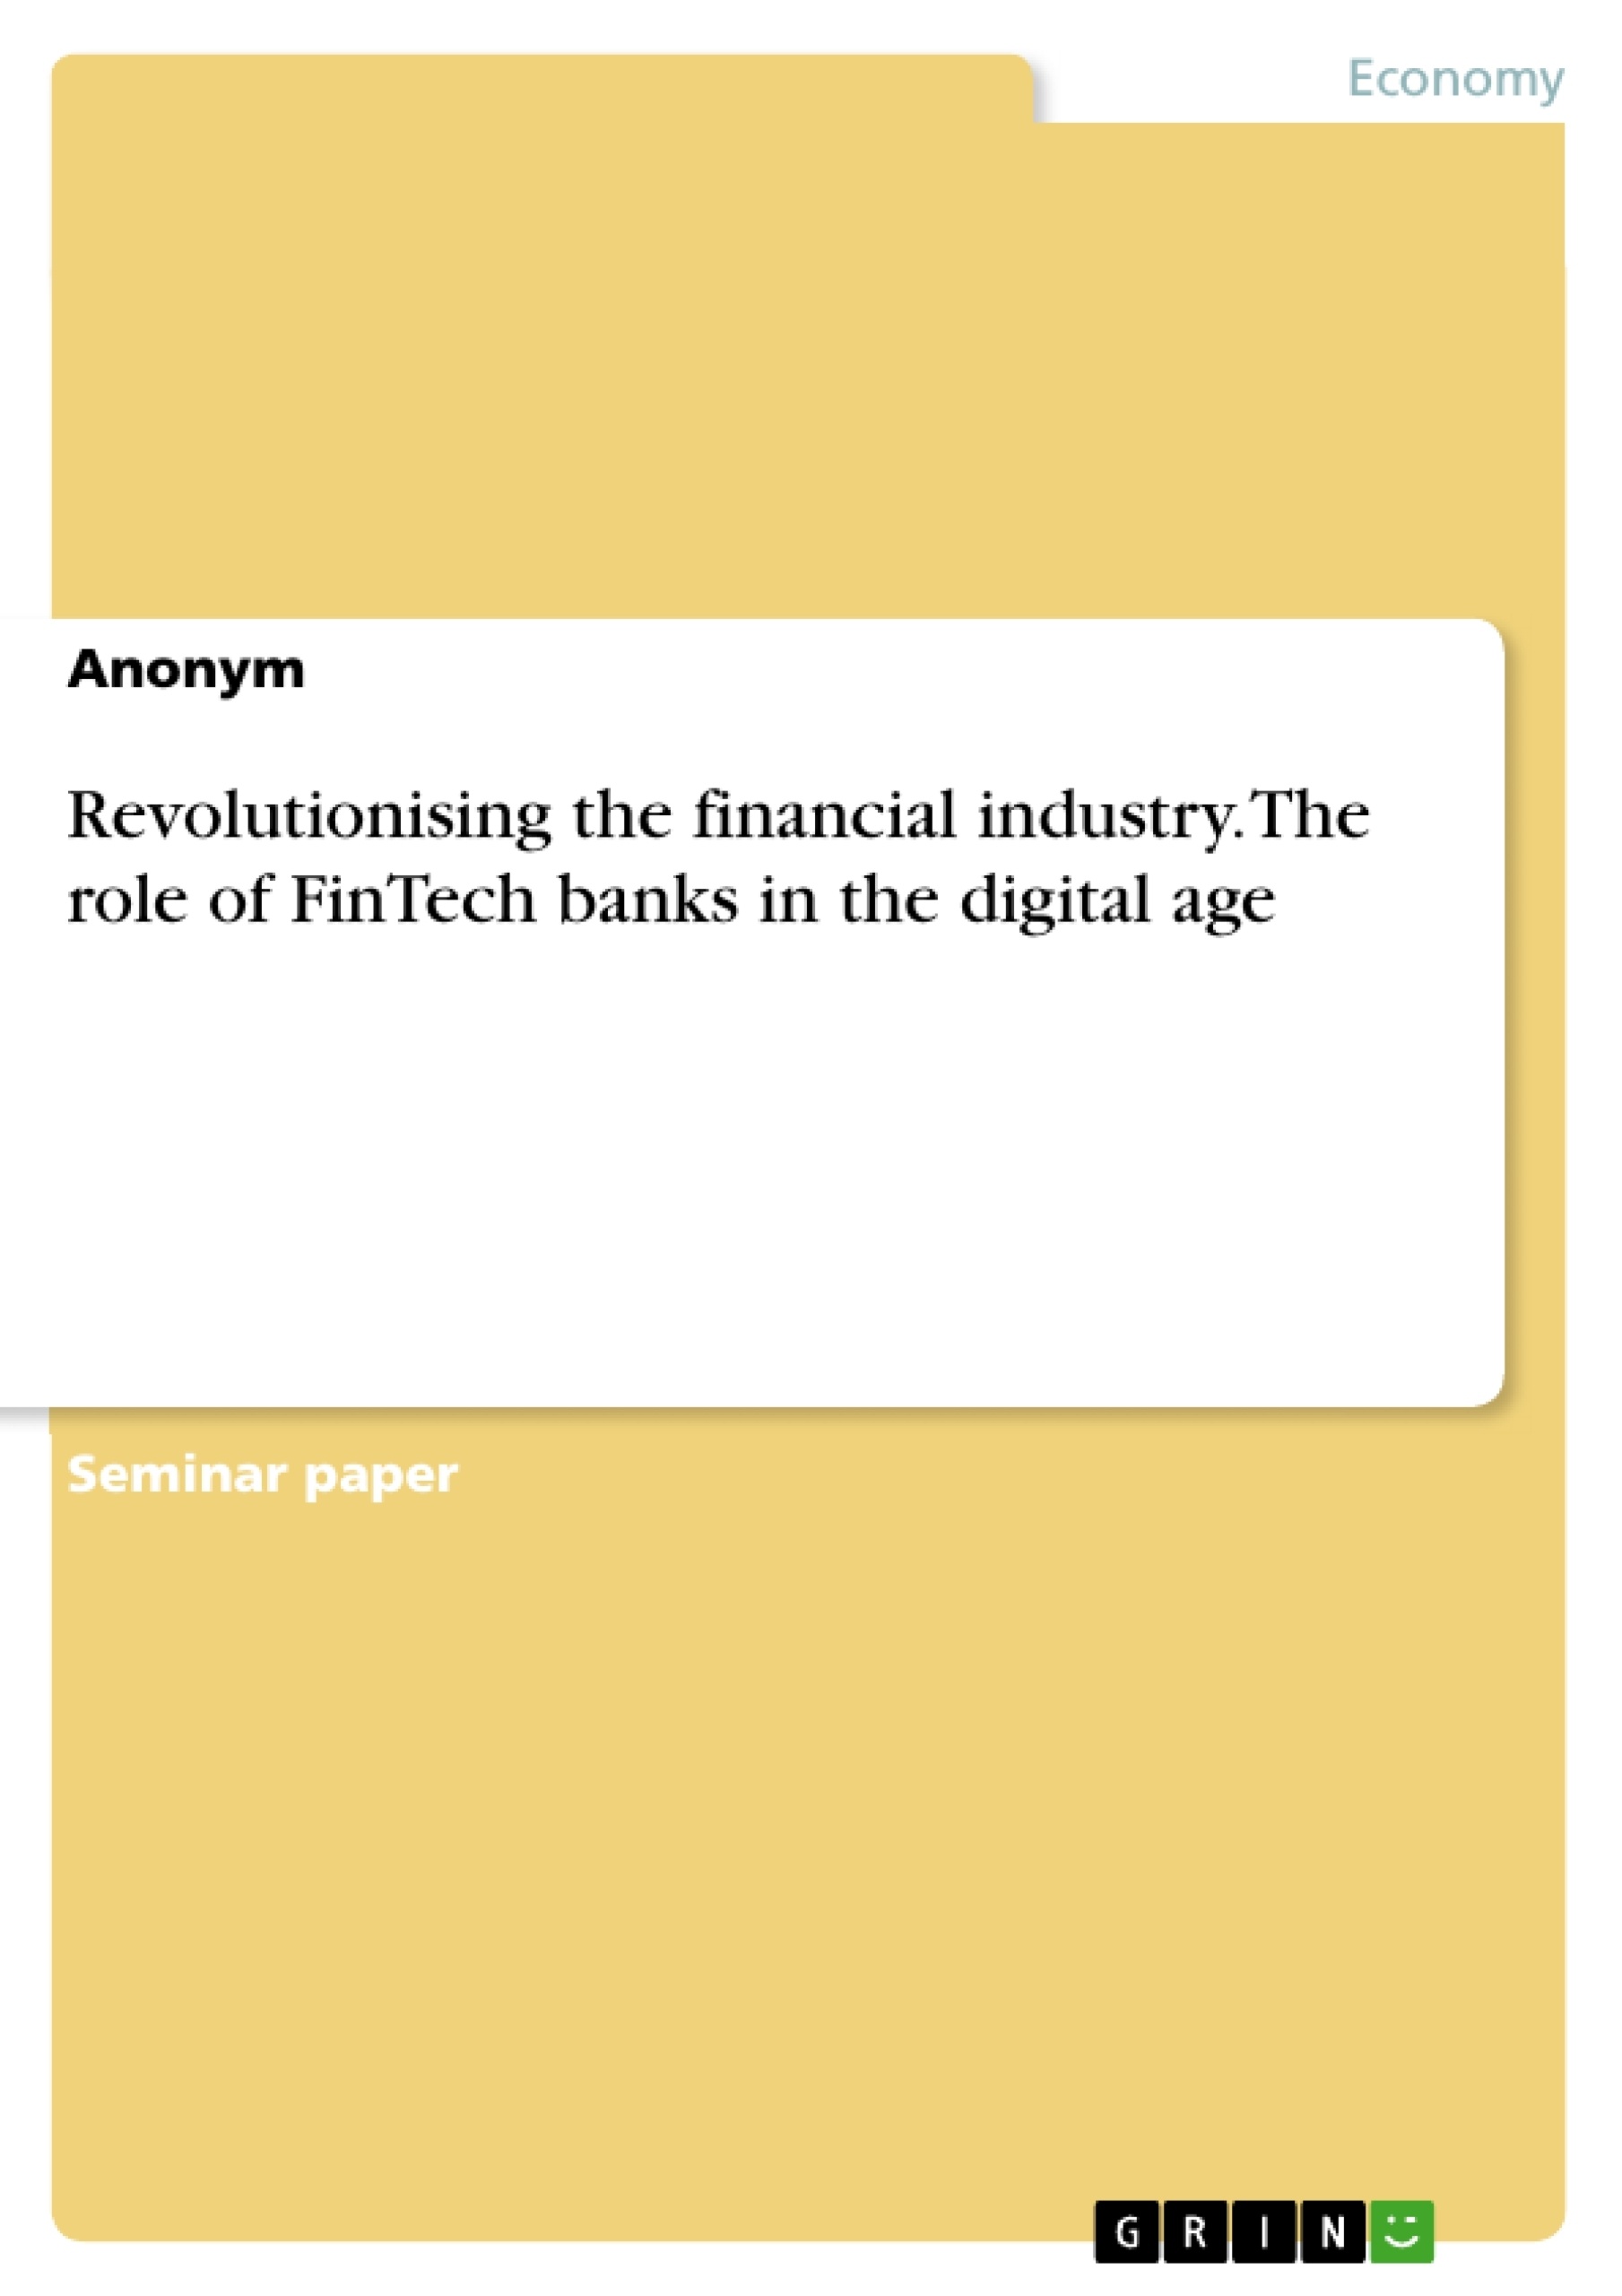 Title: Revolutionising the financial industry. The role of FinTech banks in the digital age